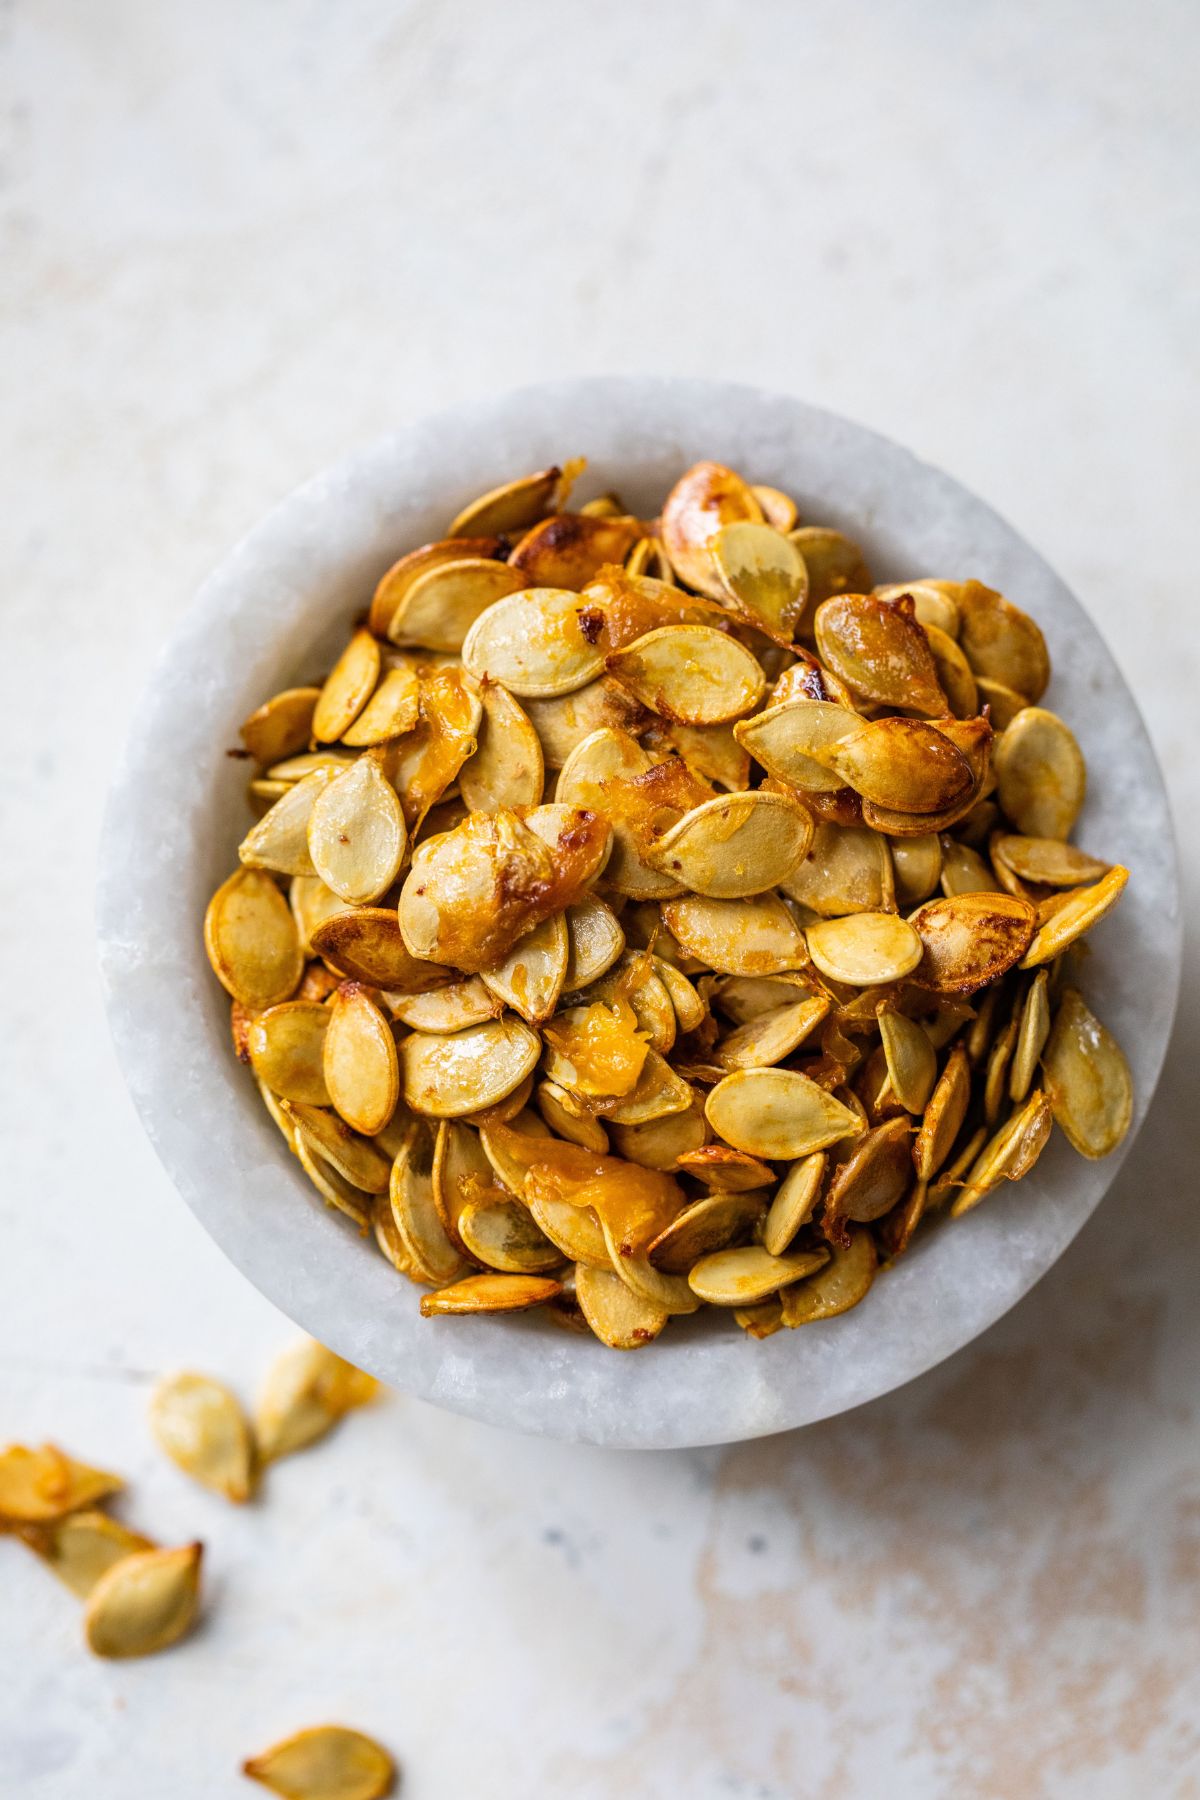 Roasted acorn squash seeds in a small marble bowl.